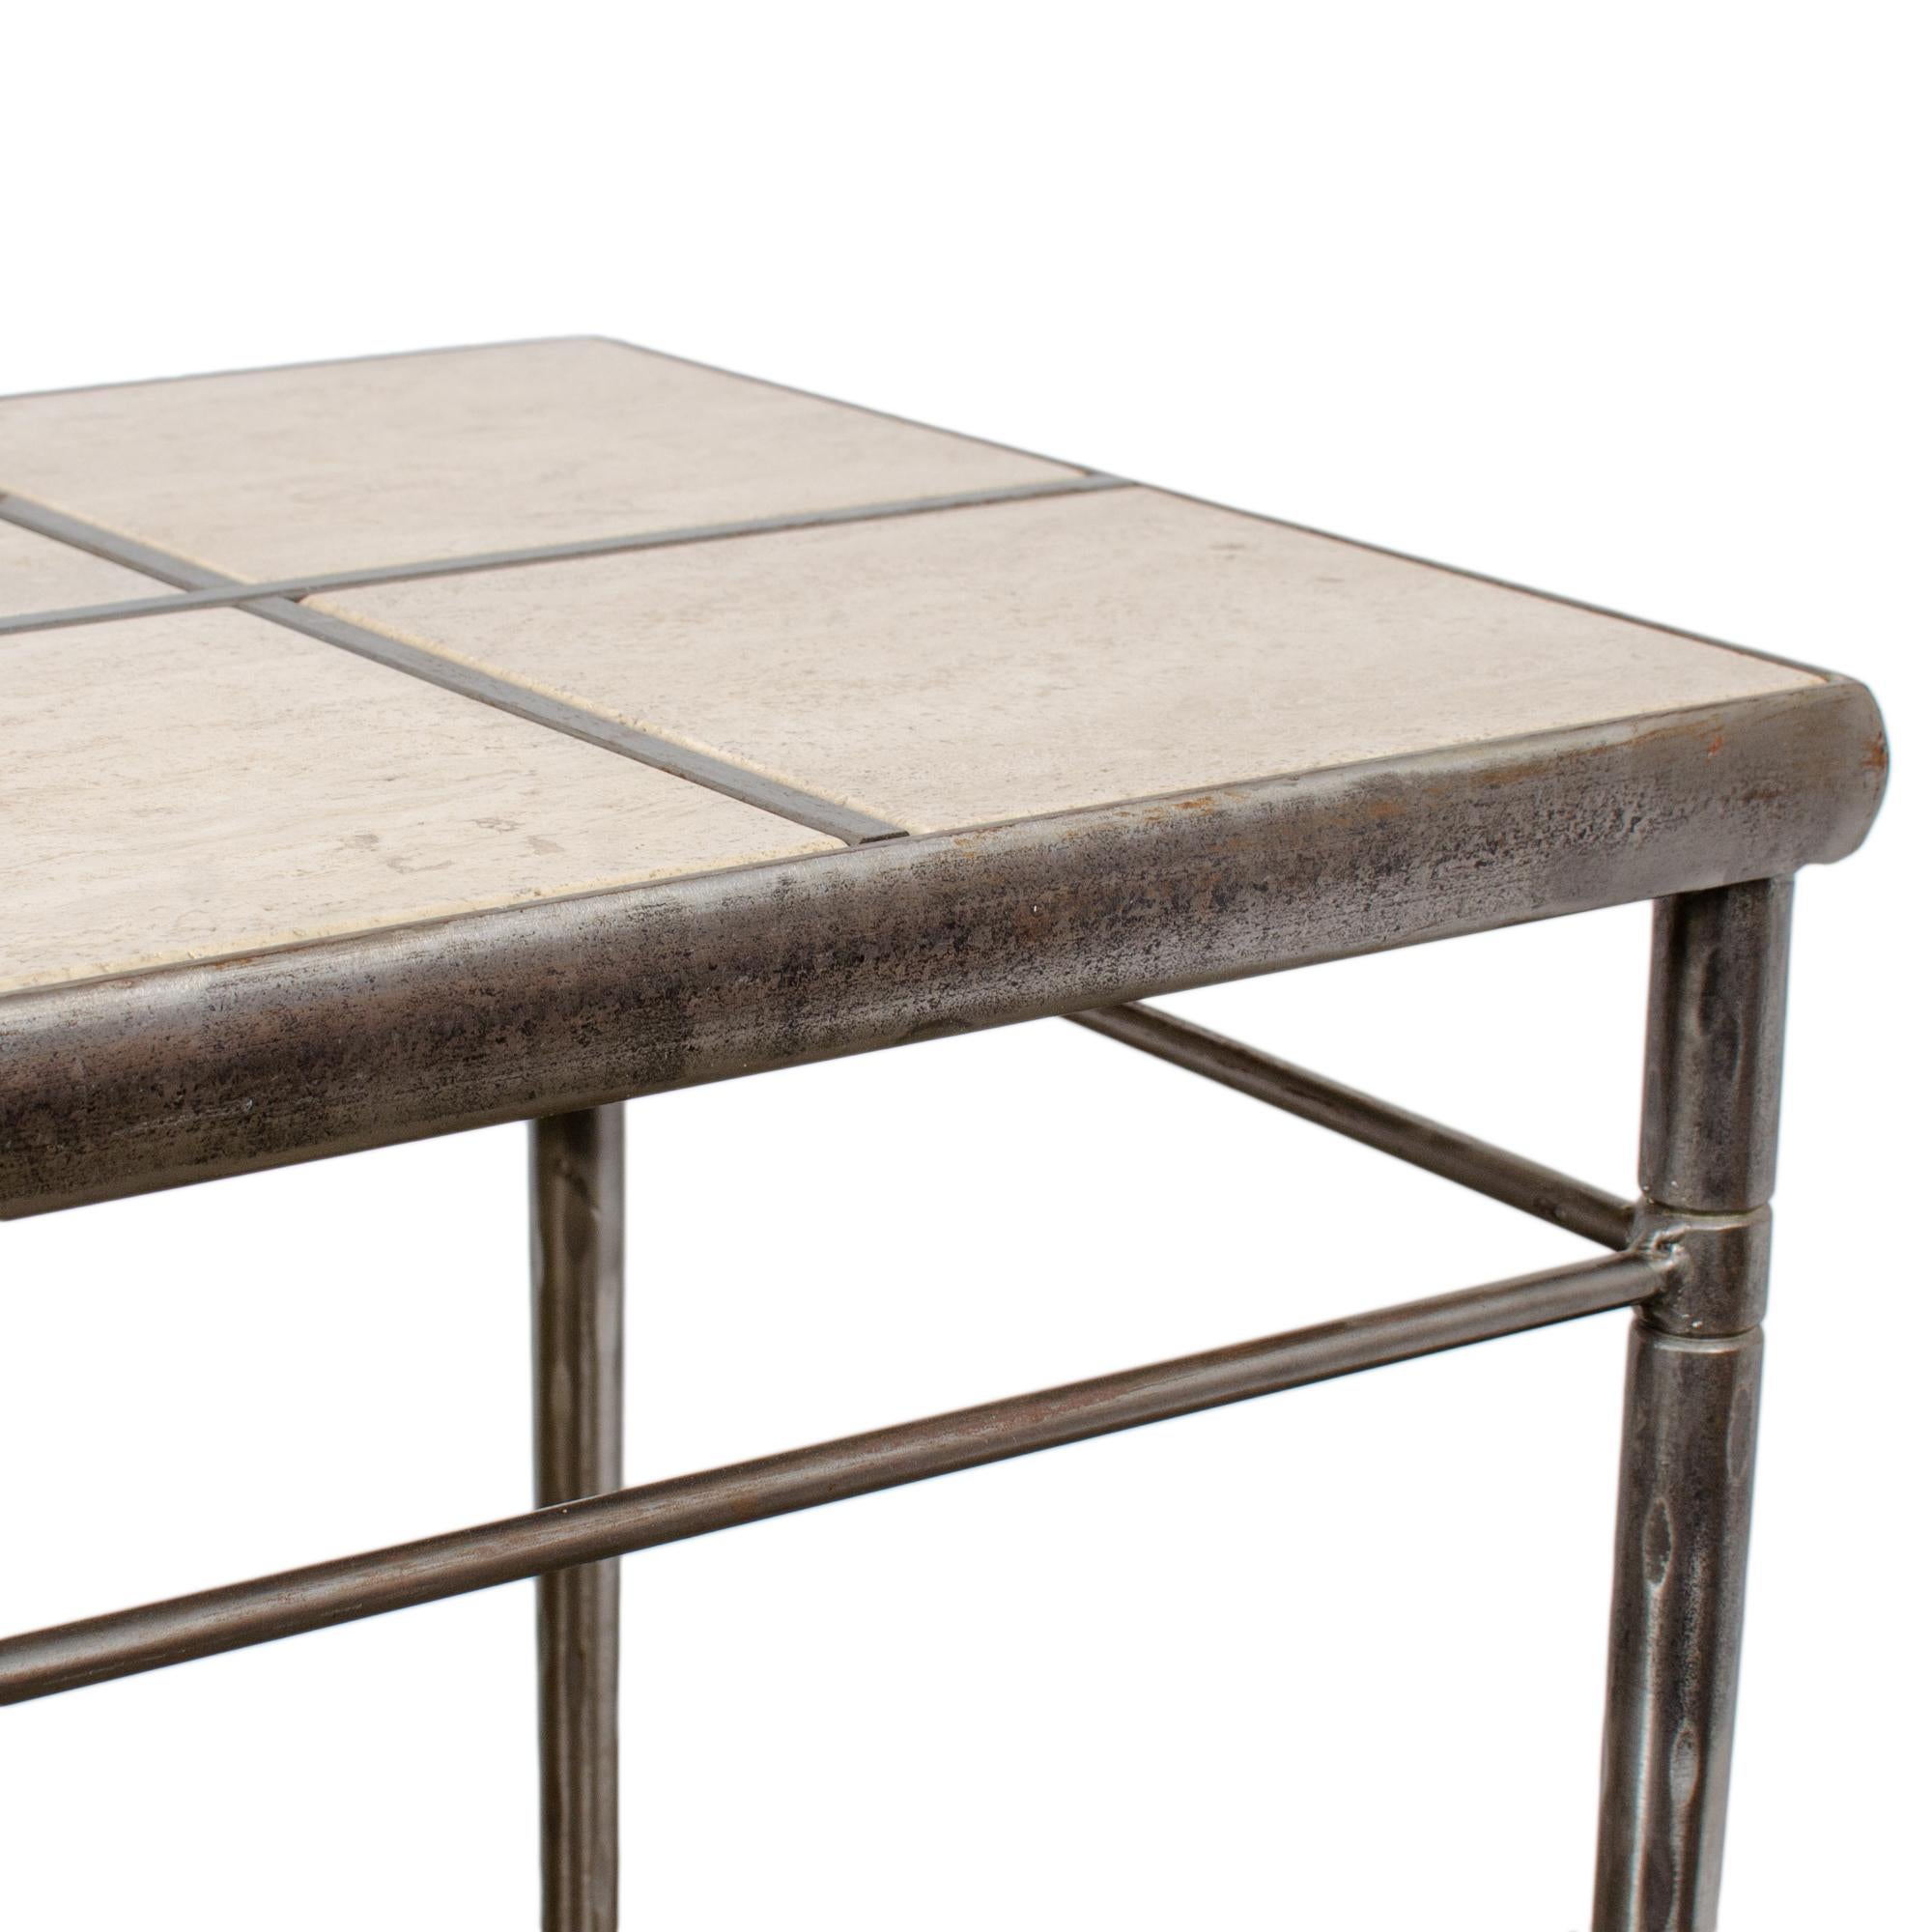 Italian Iron and Travertine Tile Console Table Regular price For Sale 2